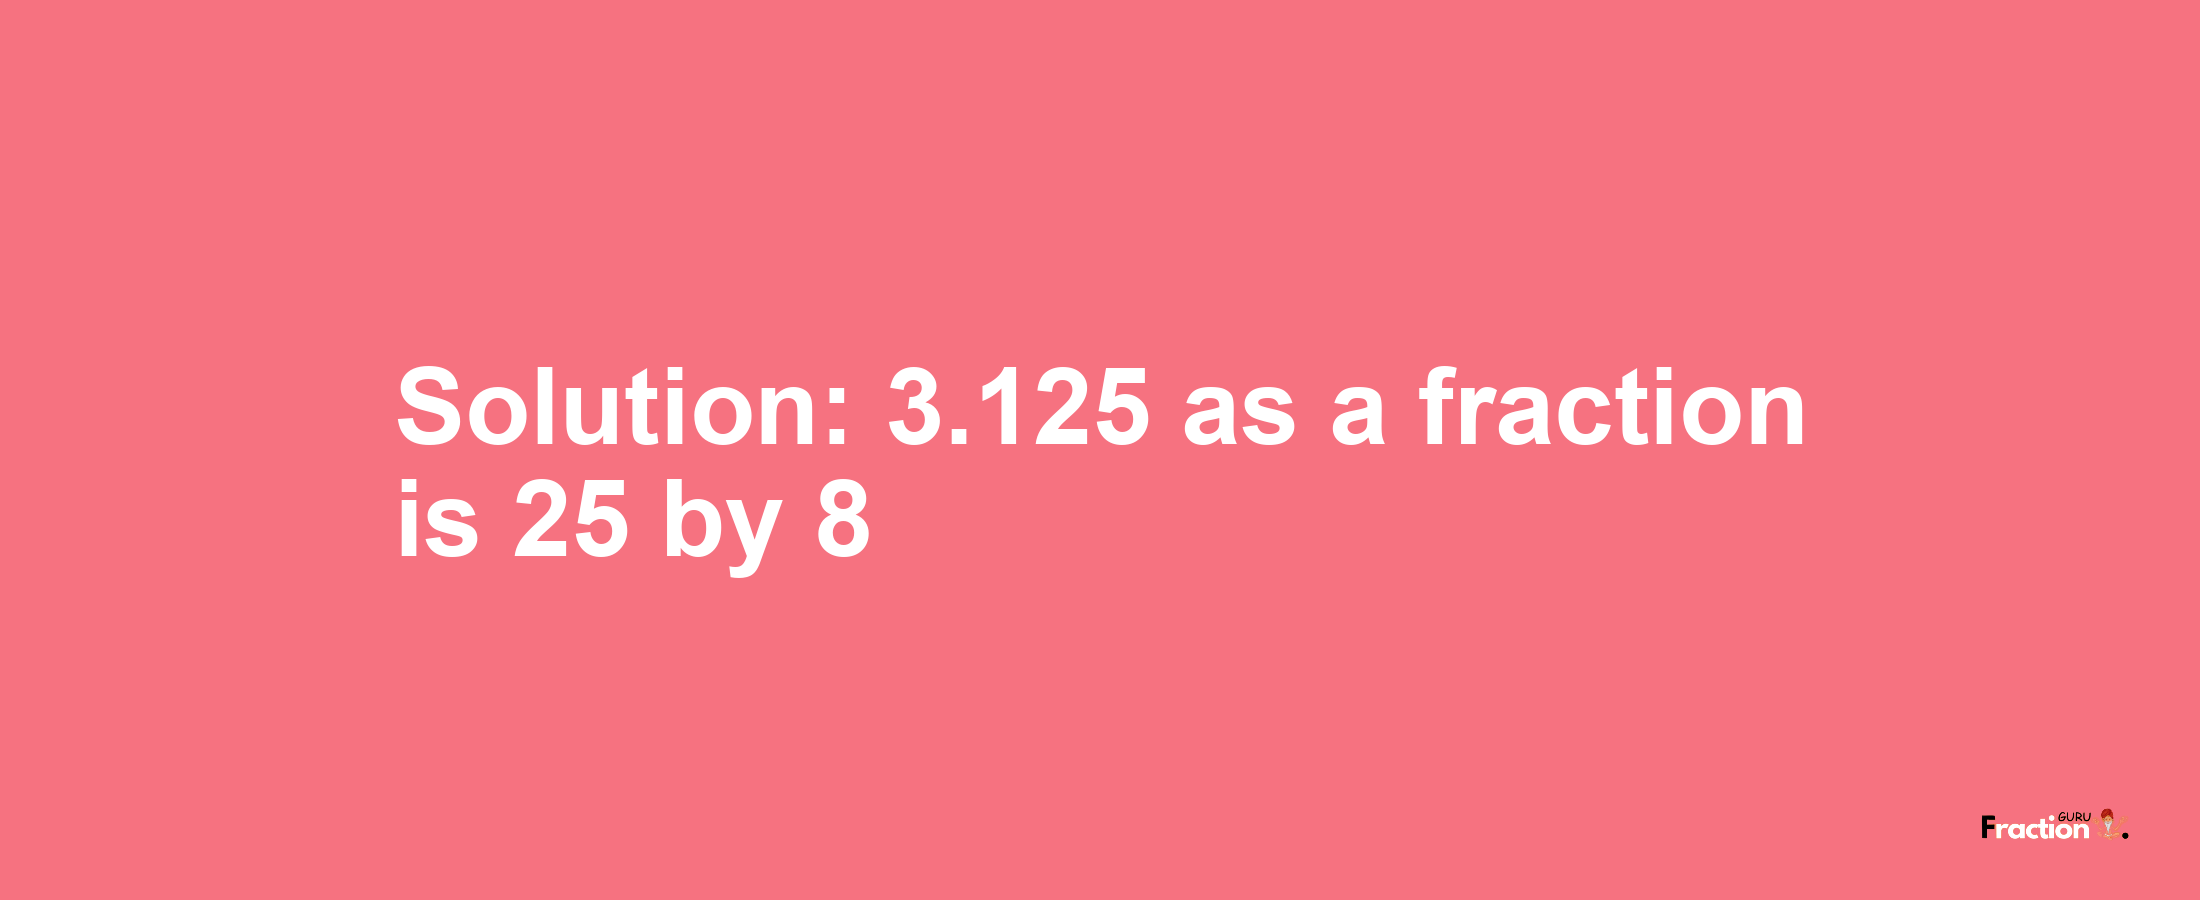 Solution:3.125 as a fraction is 25/8